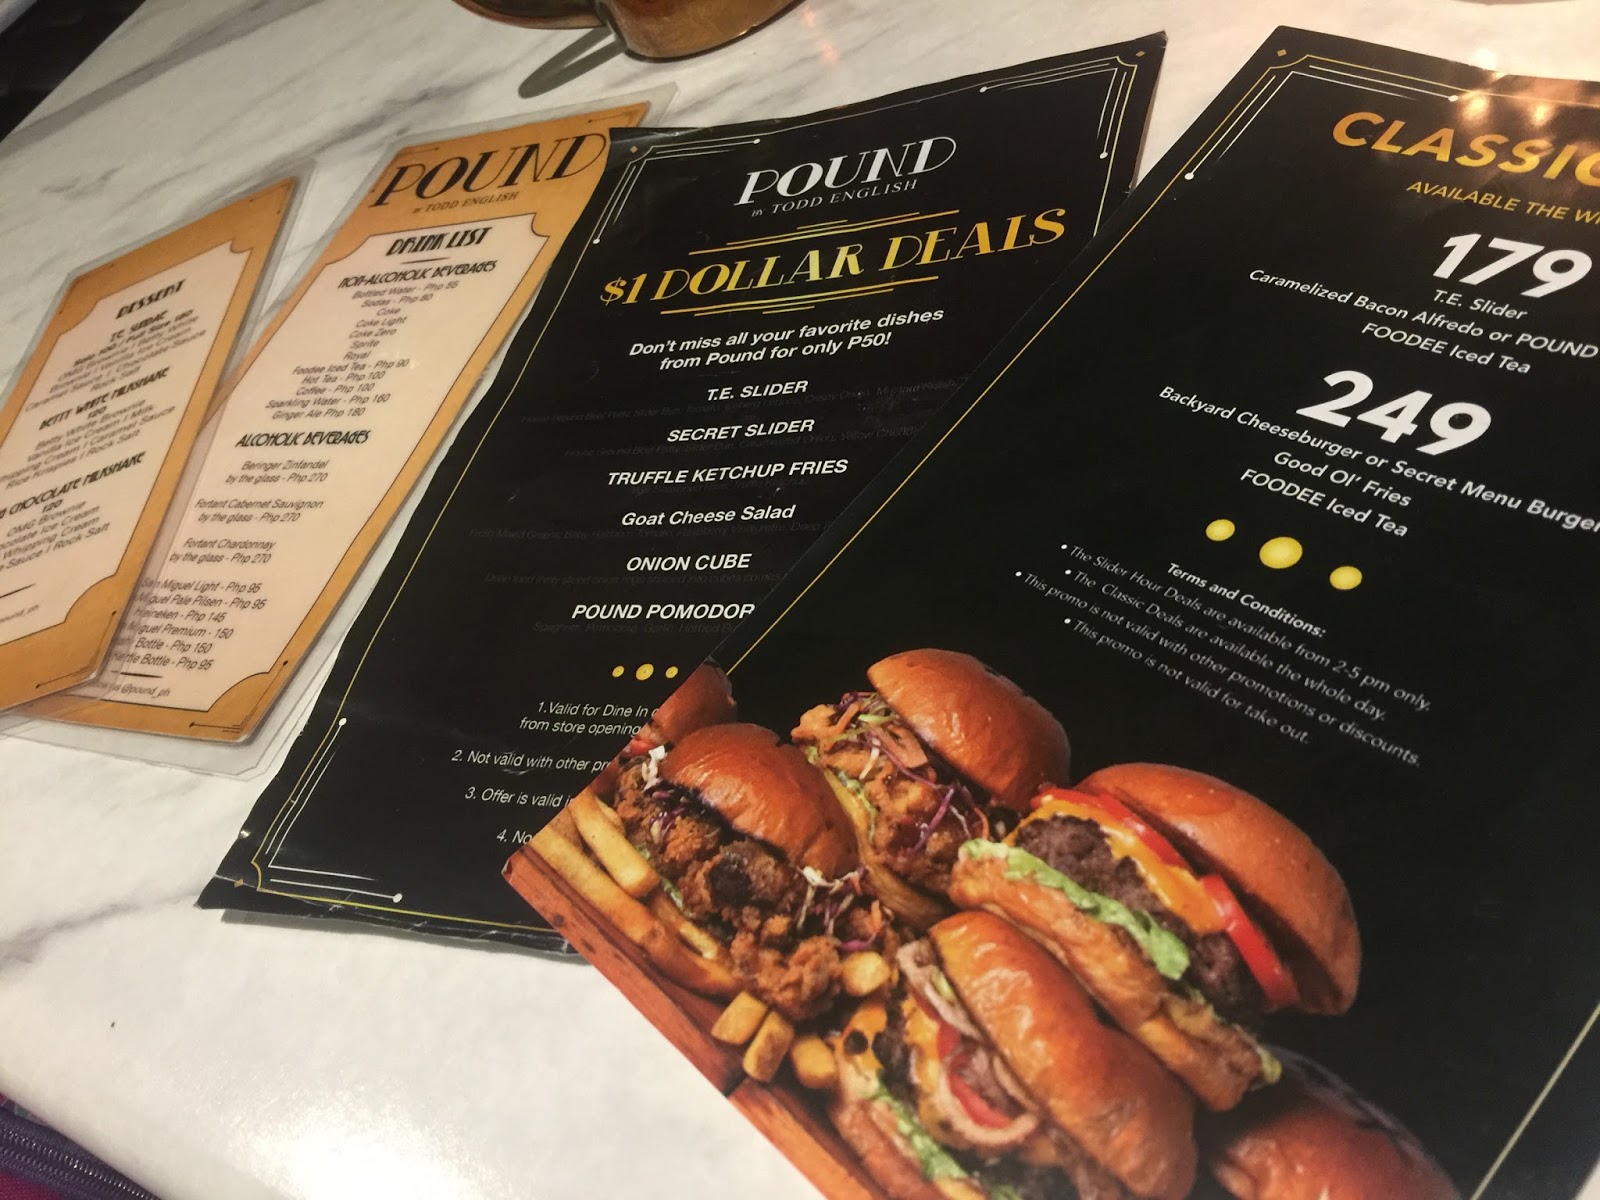 POUND by Todd English $1 deal and combo menu